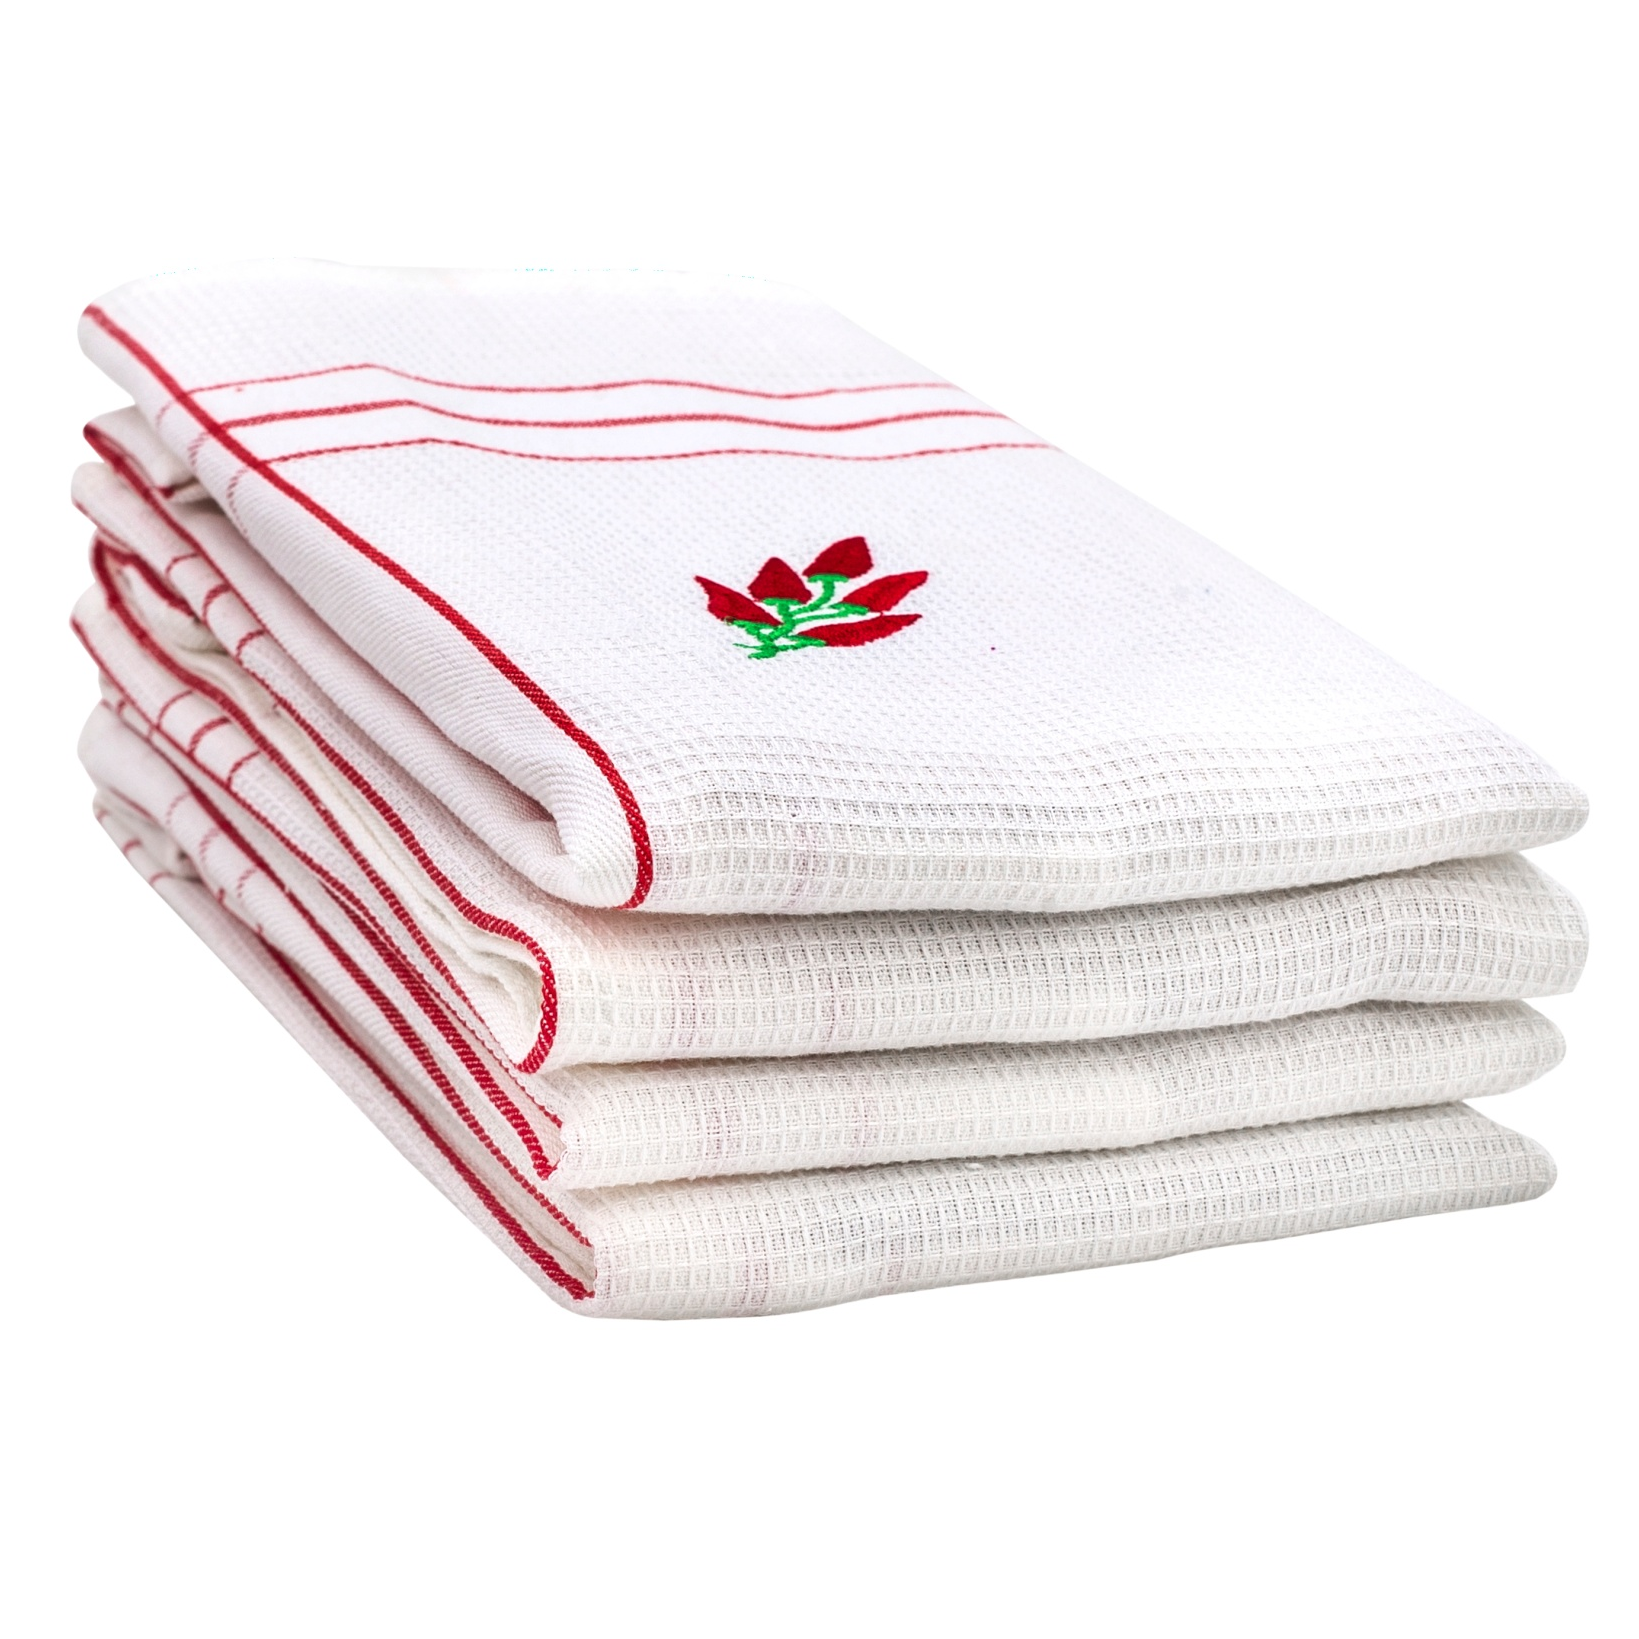 QUILTINA 100% Cotton Absorbent Kitchen Dish Towels Set, Waffle Weave Hand Towels, Ultra Soft Cloths, Quick Drying Rags - 17 x 25